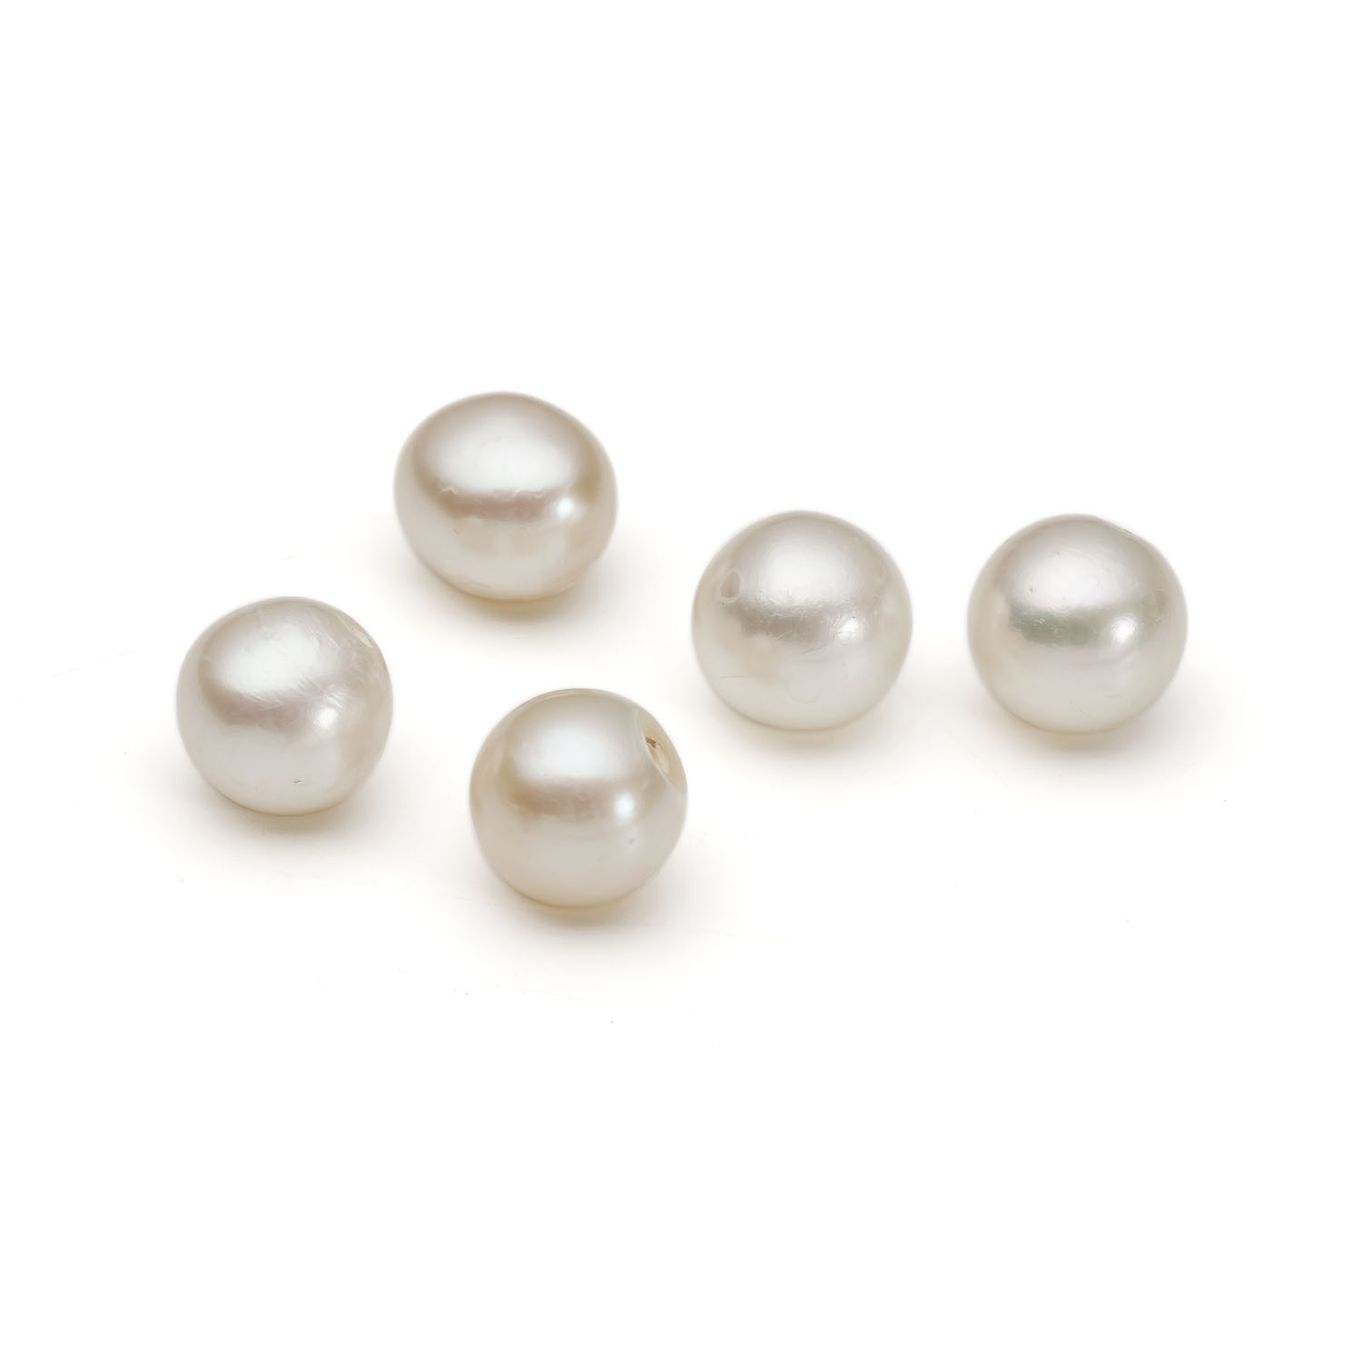 Cultured Freshwater Half Drilled White Pearls, 5.5-6mm Roundish